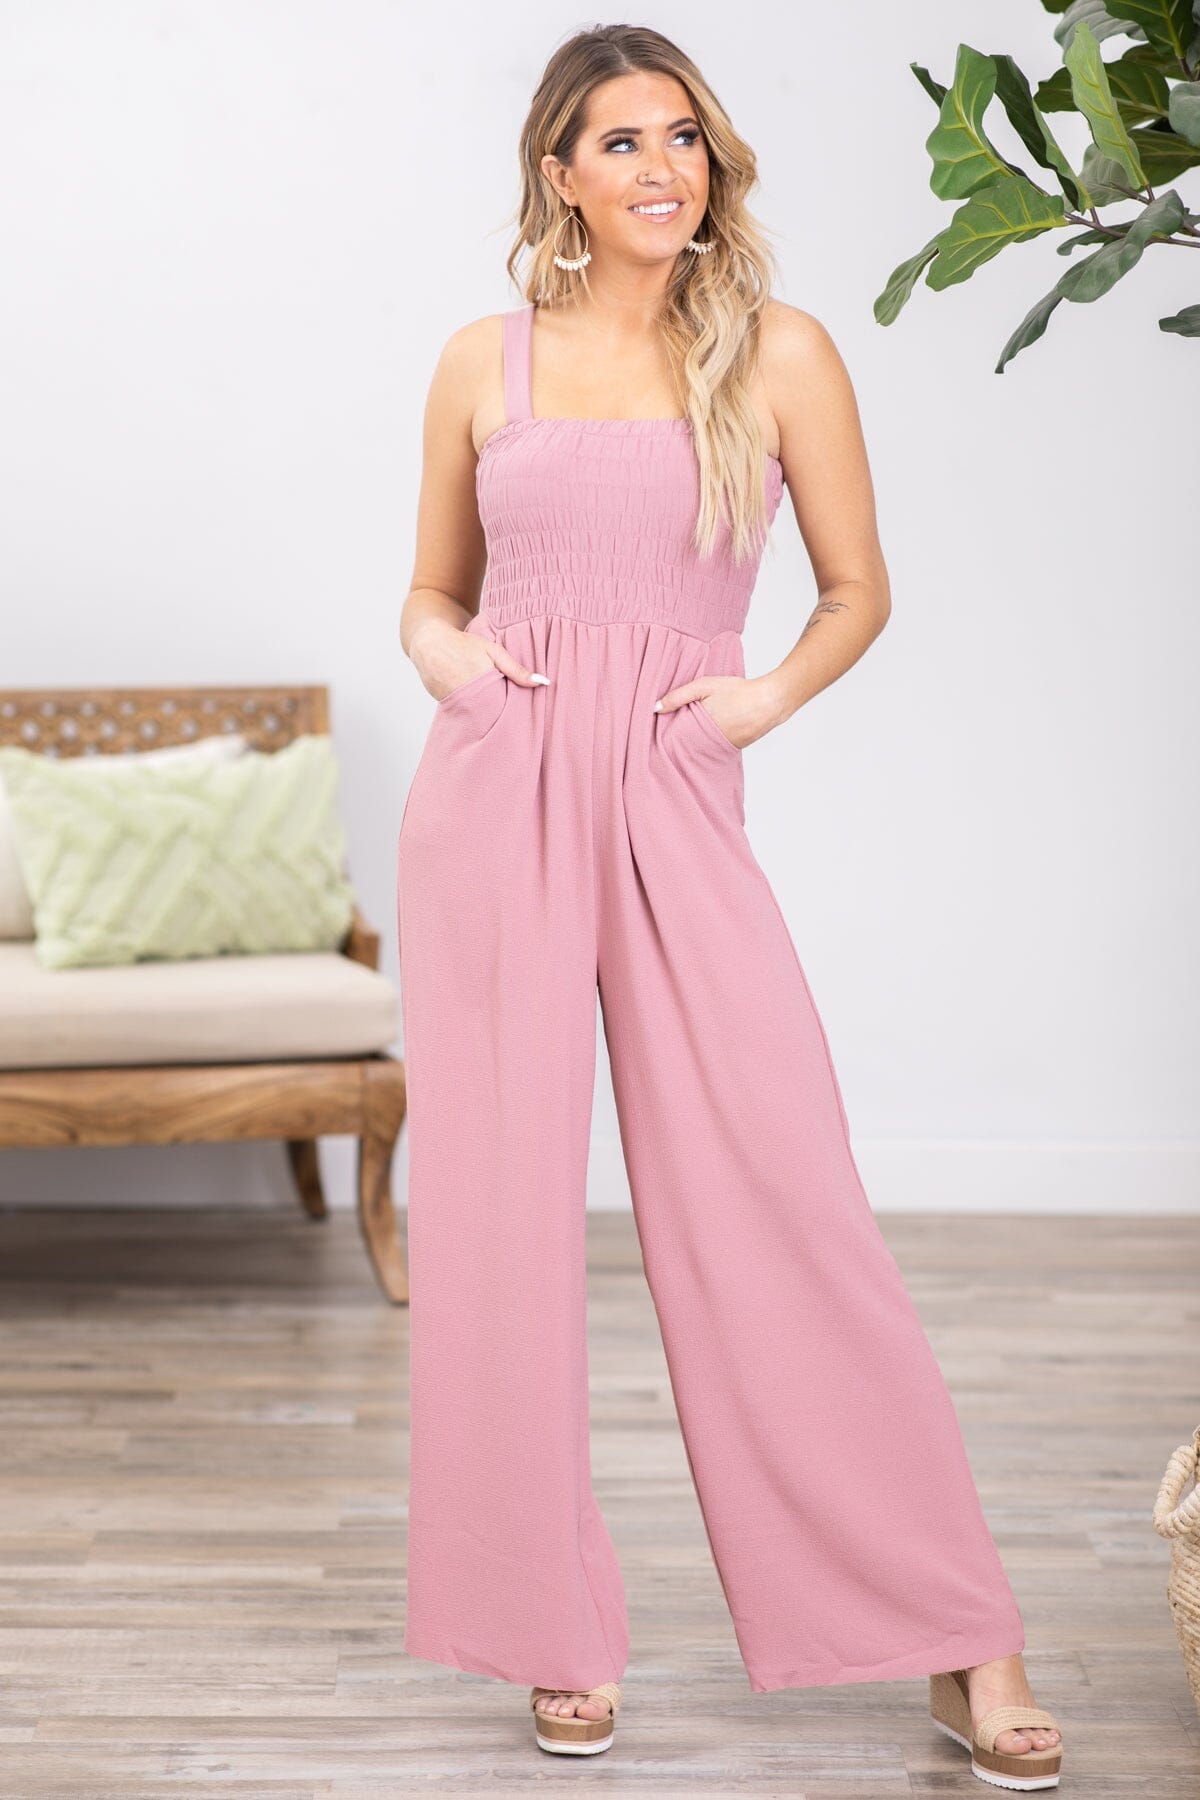 Dusty Rose Smocked Knit Bodice Jumpsuit - Filly Flair